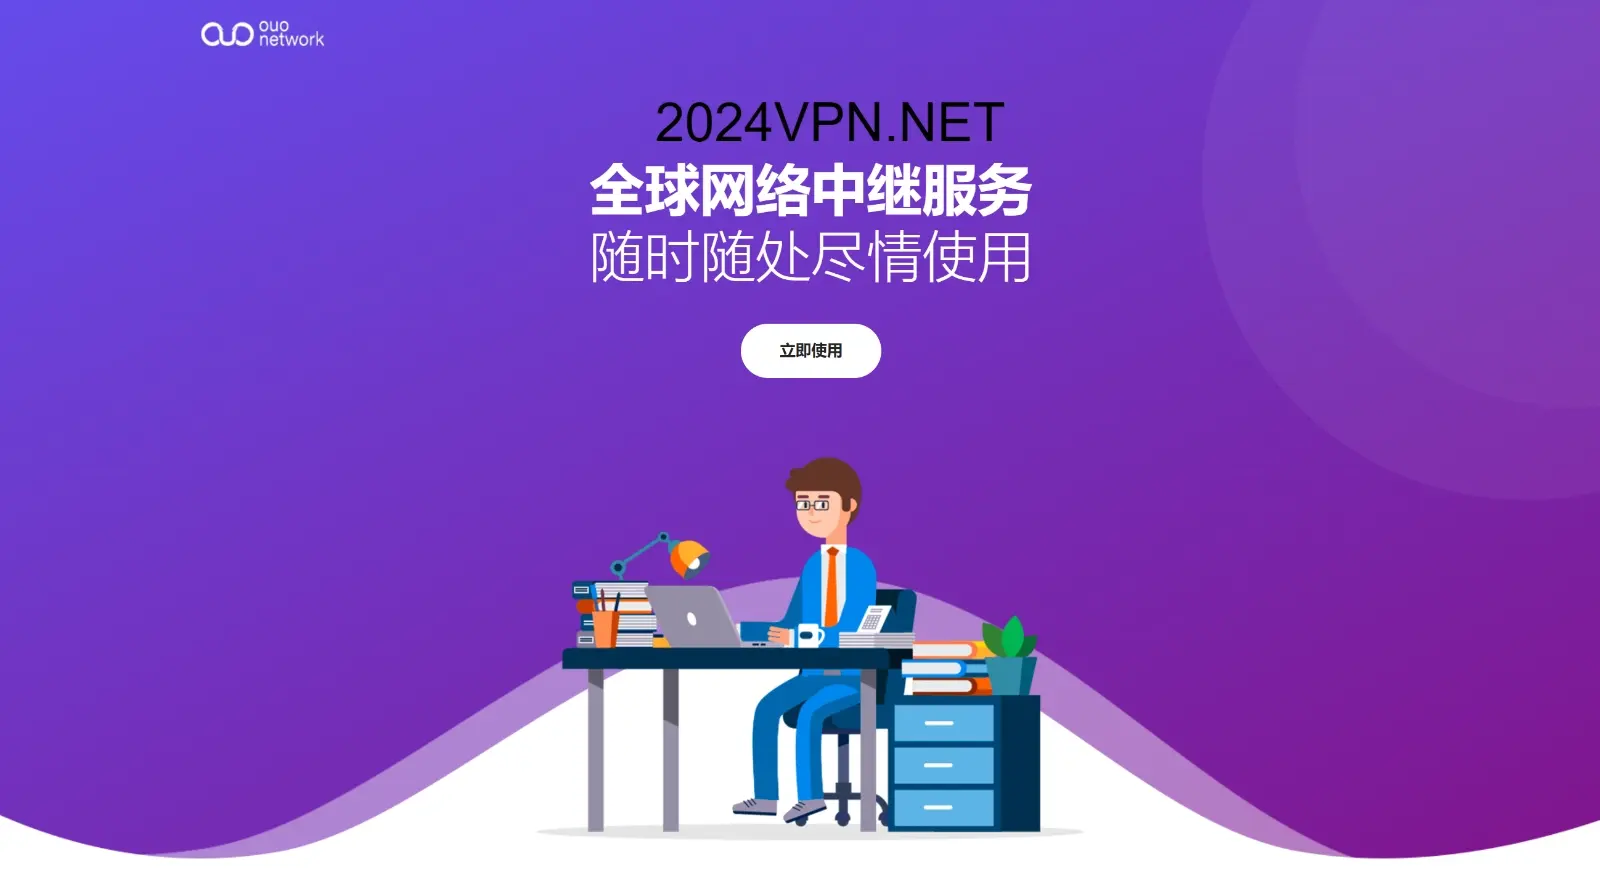 OuO Network 机场VPN官方网站